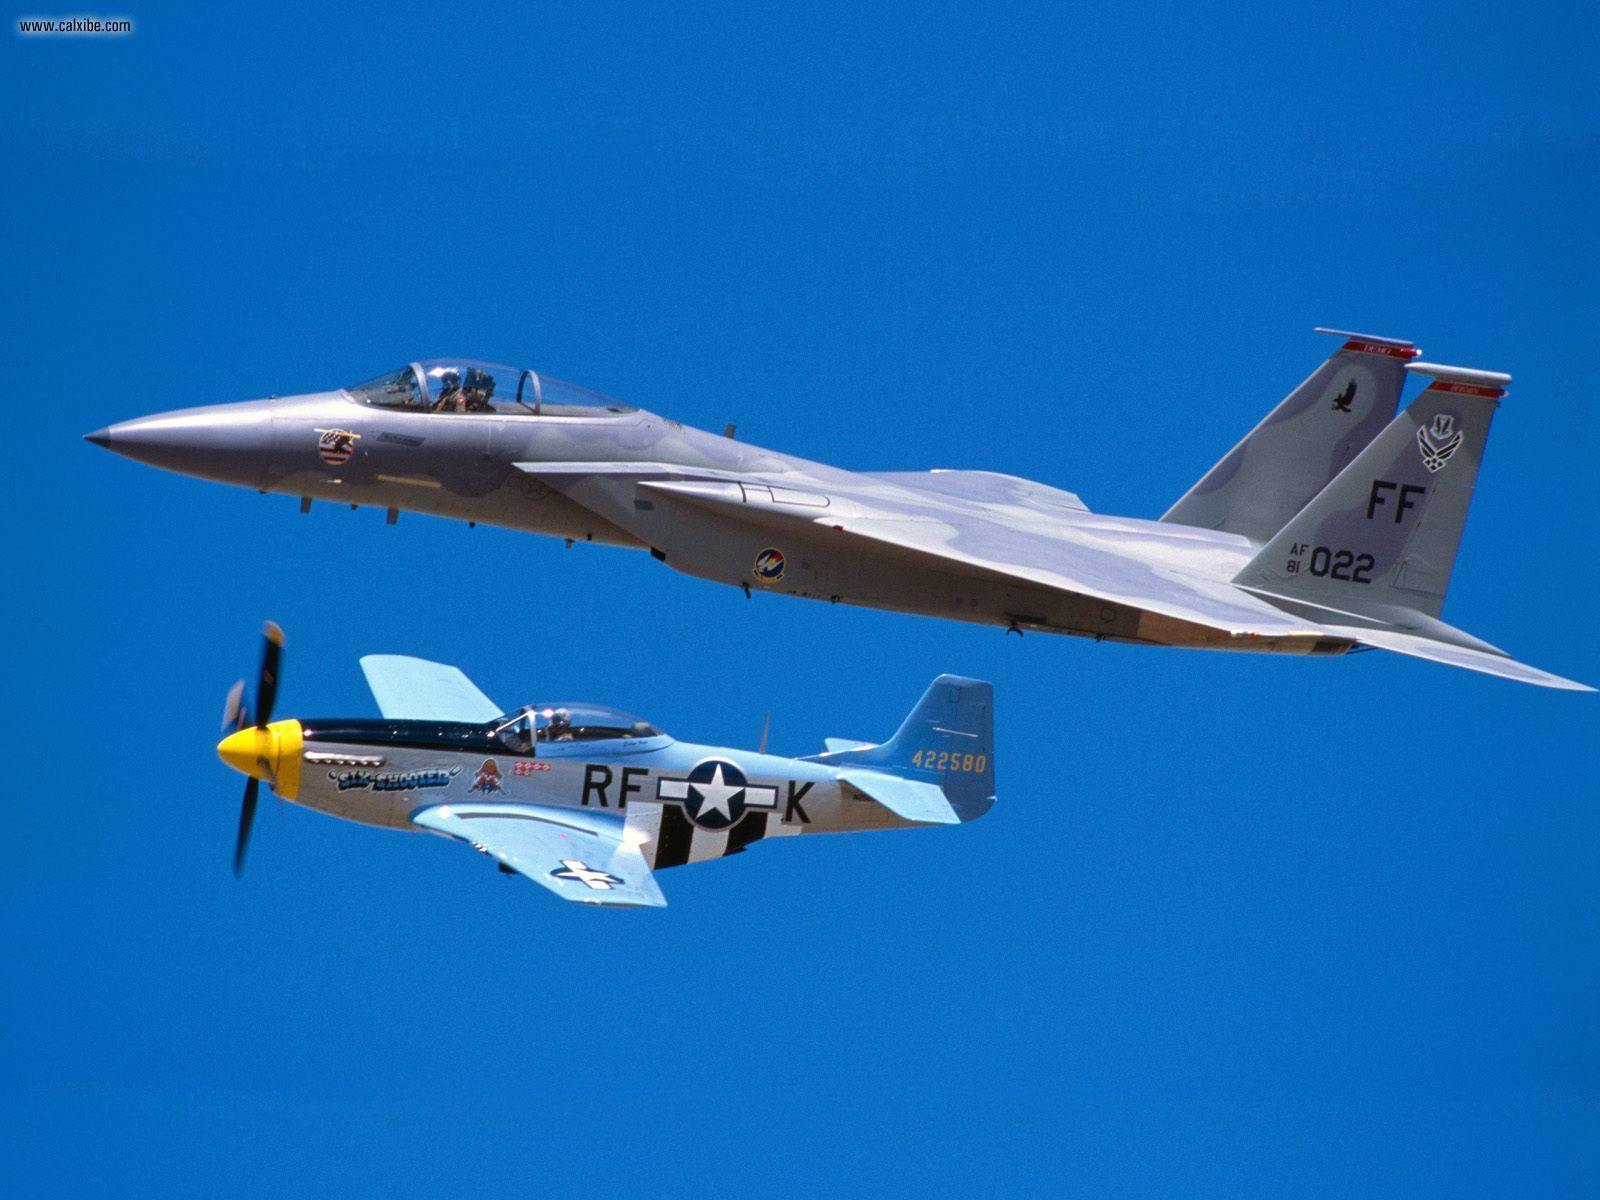 Aircraft / Planes: F15 Eagle And P51 Mustang, picture nr. 19662